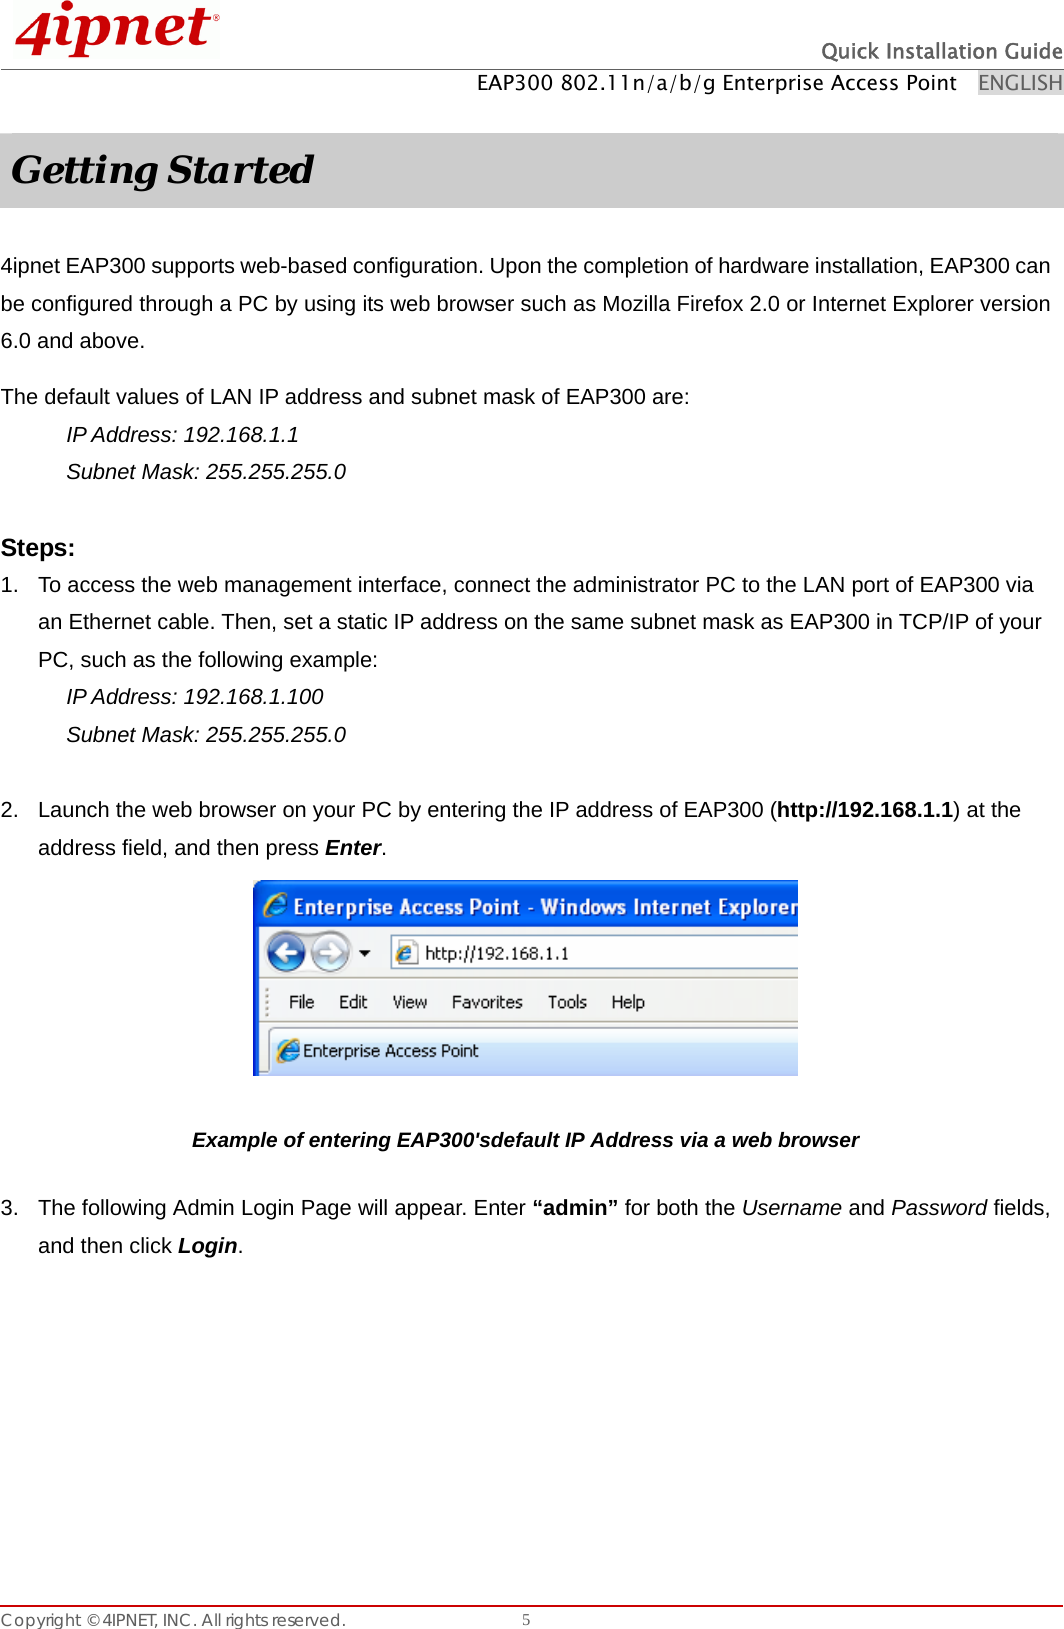  Quick Installation Guide EAP300 802.11n/a/b/g Enterprise Access Point    ENGLISH Copyright © 4IPNET, INC. All rights reserved.    5 Getting Started  4ipnet EAP300 supports web-based configuration. Upon the completion of hardware installation, EAP300 can be configured through a PC by using its web browser such as Mozilla Firefox 2.0 or Internet Explorer version 6.0 and above. The default values of LAN IP address and subnet mask of EAP300 are: IP Address: 192.168.1.1 Subnet Mask: 255.255.255.0    Steps: 1.  To access the web management interface, connect the administrator PC to the LAN port of EAP300 via an Ethernet cable. Then, set a static IP address on the same subnet mask as EAP300 in TCP/IP of your PC, such as the following example: IP Address: 192.168.1.100 Subnet Mask: 255.255.255.0    2.  Launch the web browser on your PC by entering the IP address of EAP300 (http://192.168.1.1) at the address field, and then press Enter.   Example of entering EAP300&apos;sdefault IP Address via a web browser 3.  The following Admin Login Page will appear. Enter “admin” for both the Username and Password fields, and then click Login.  